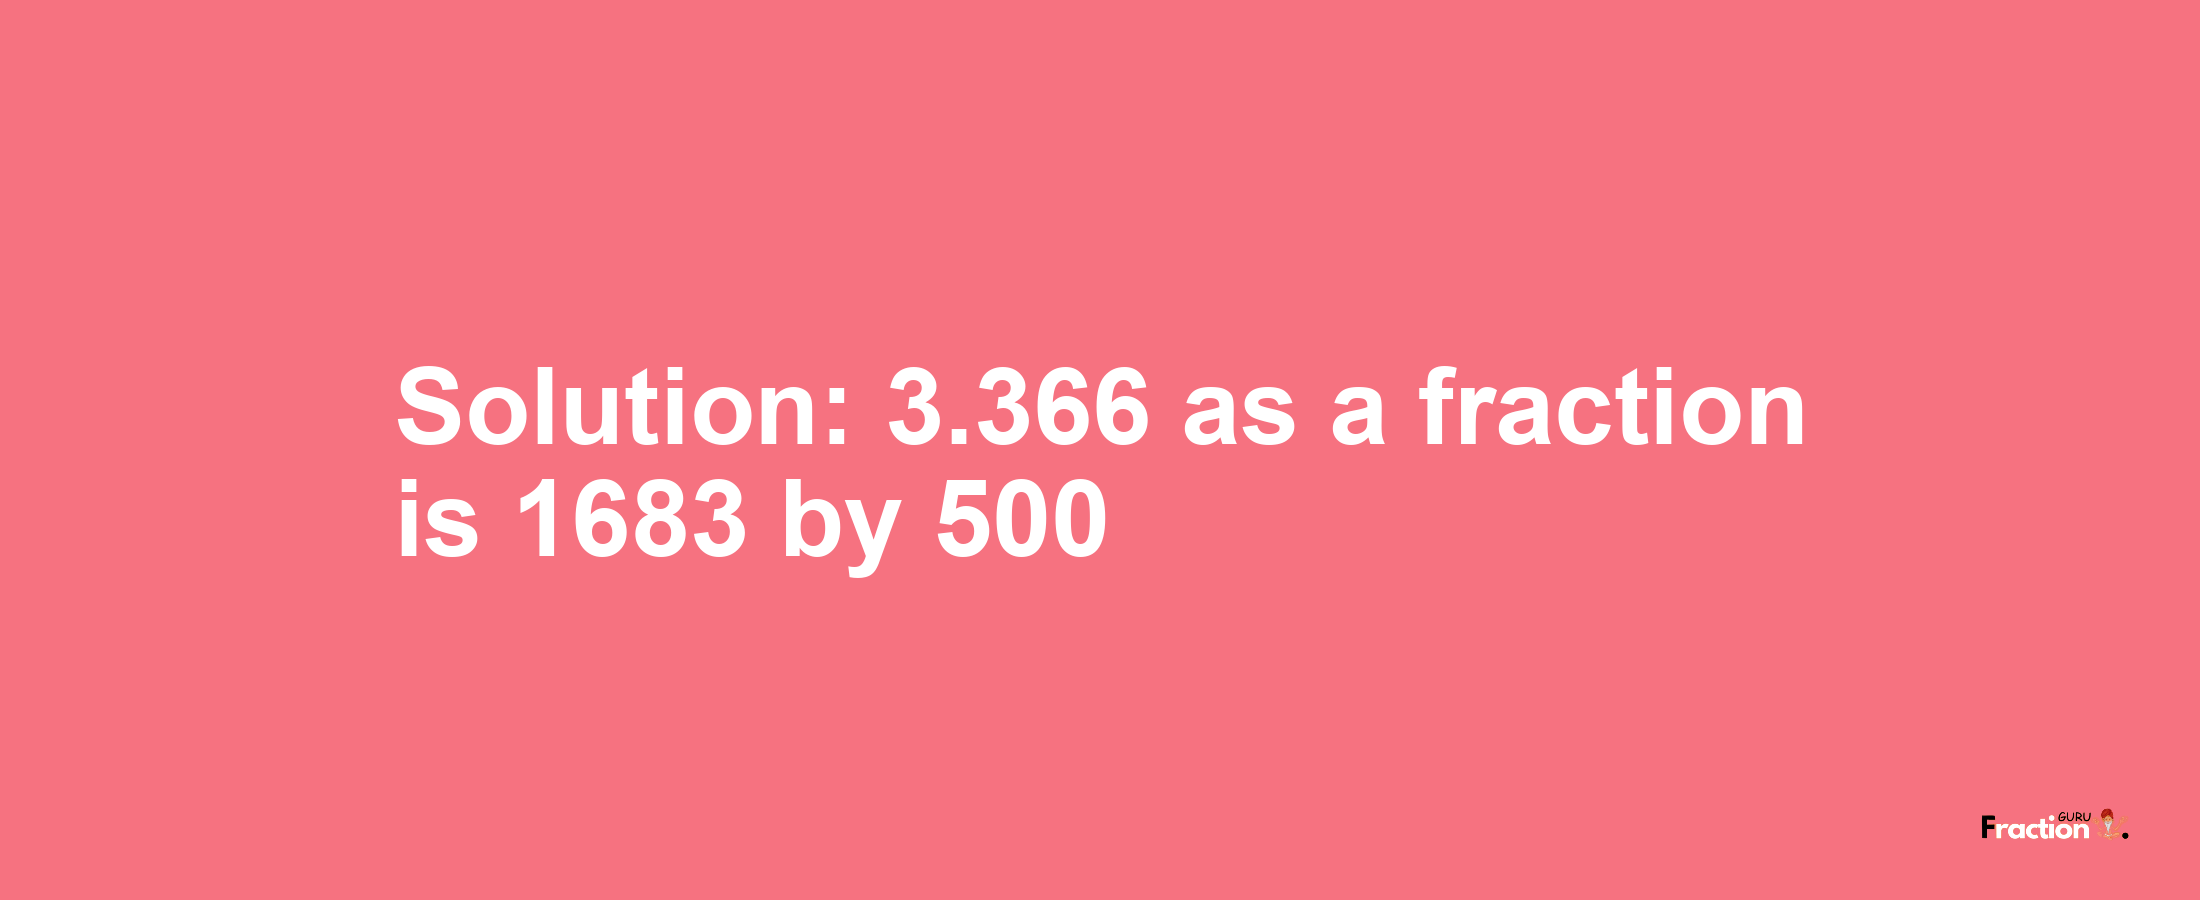 Solution:3.366 as a fraction is 1683/500